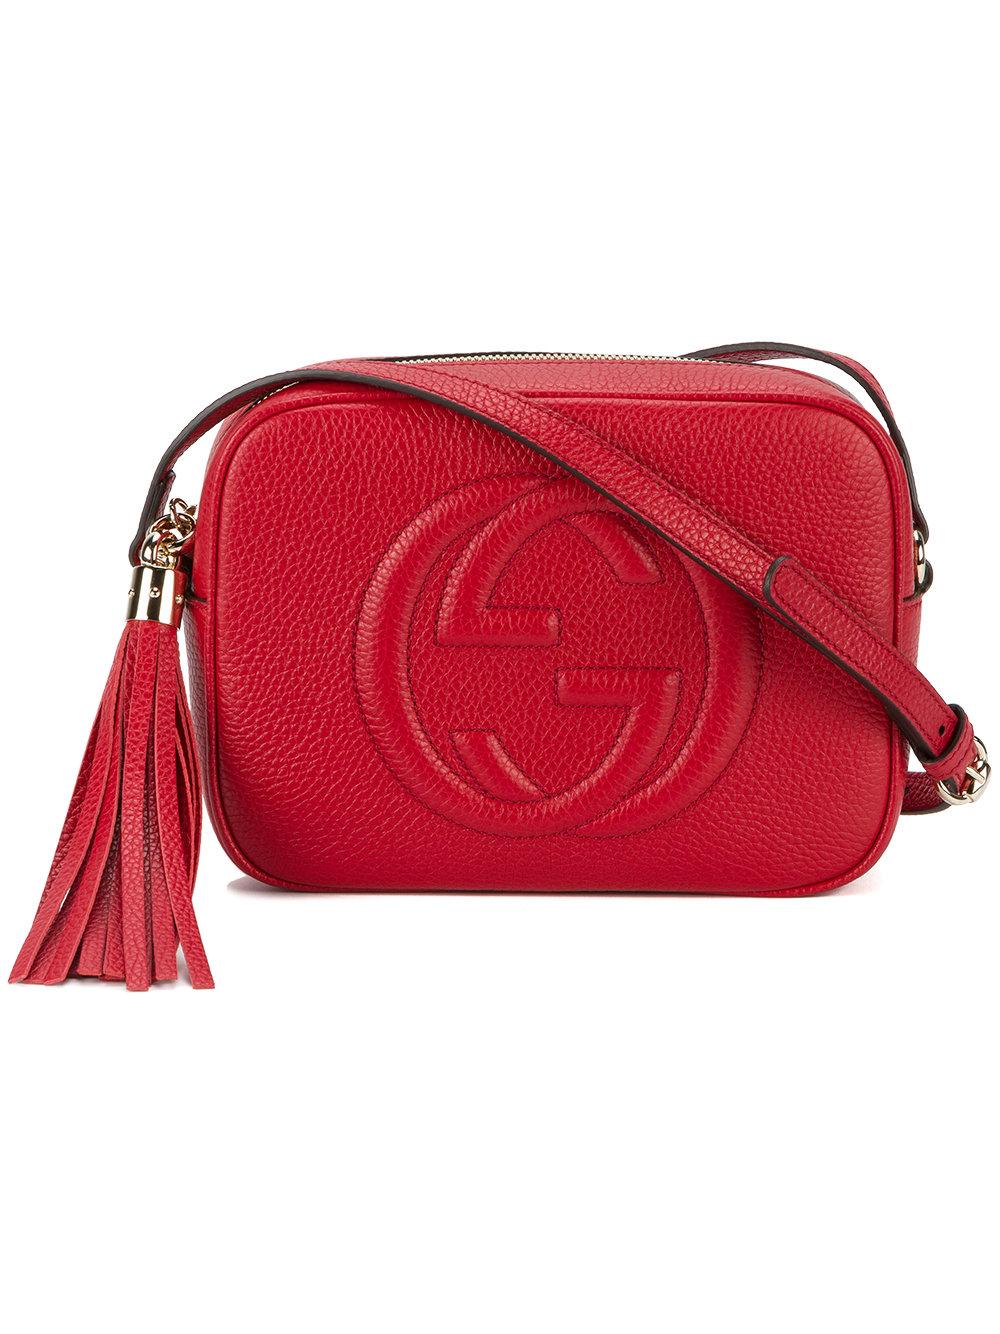 Lyst - Gucci Gg Marmont Cross Body Bag in Red